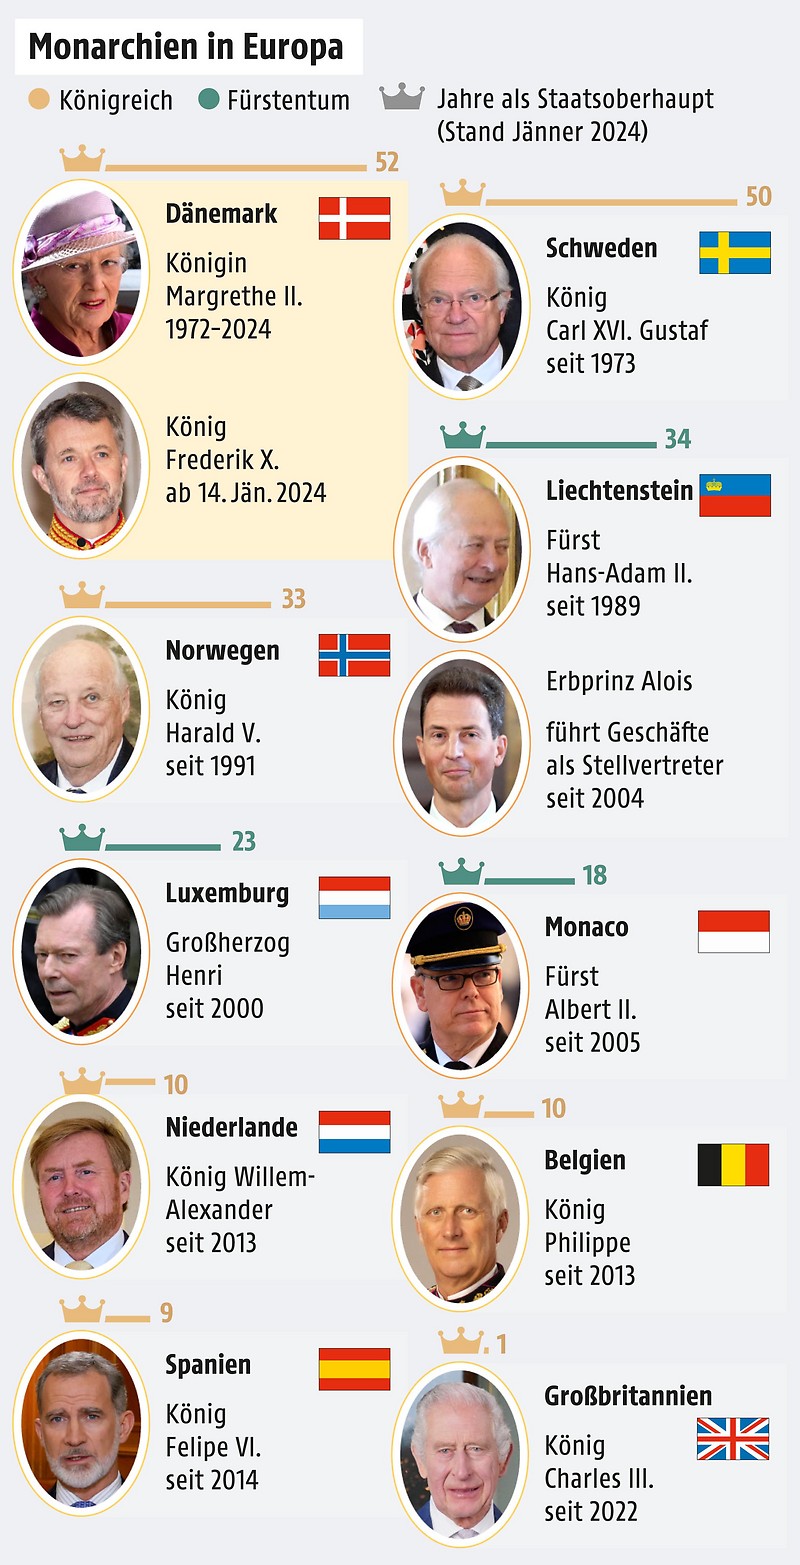 Graphic about monarchies in Europe